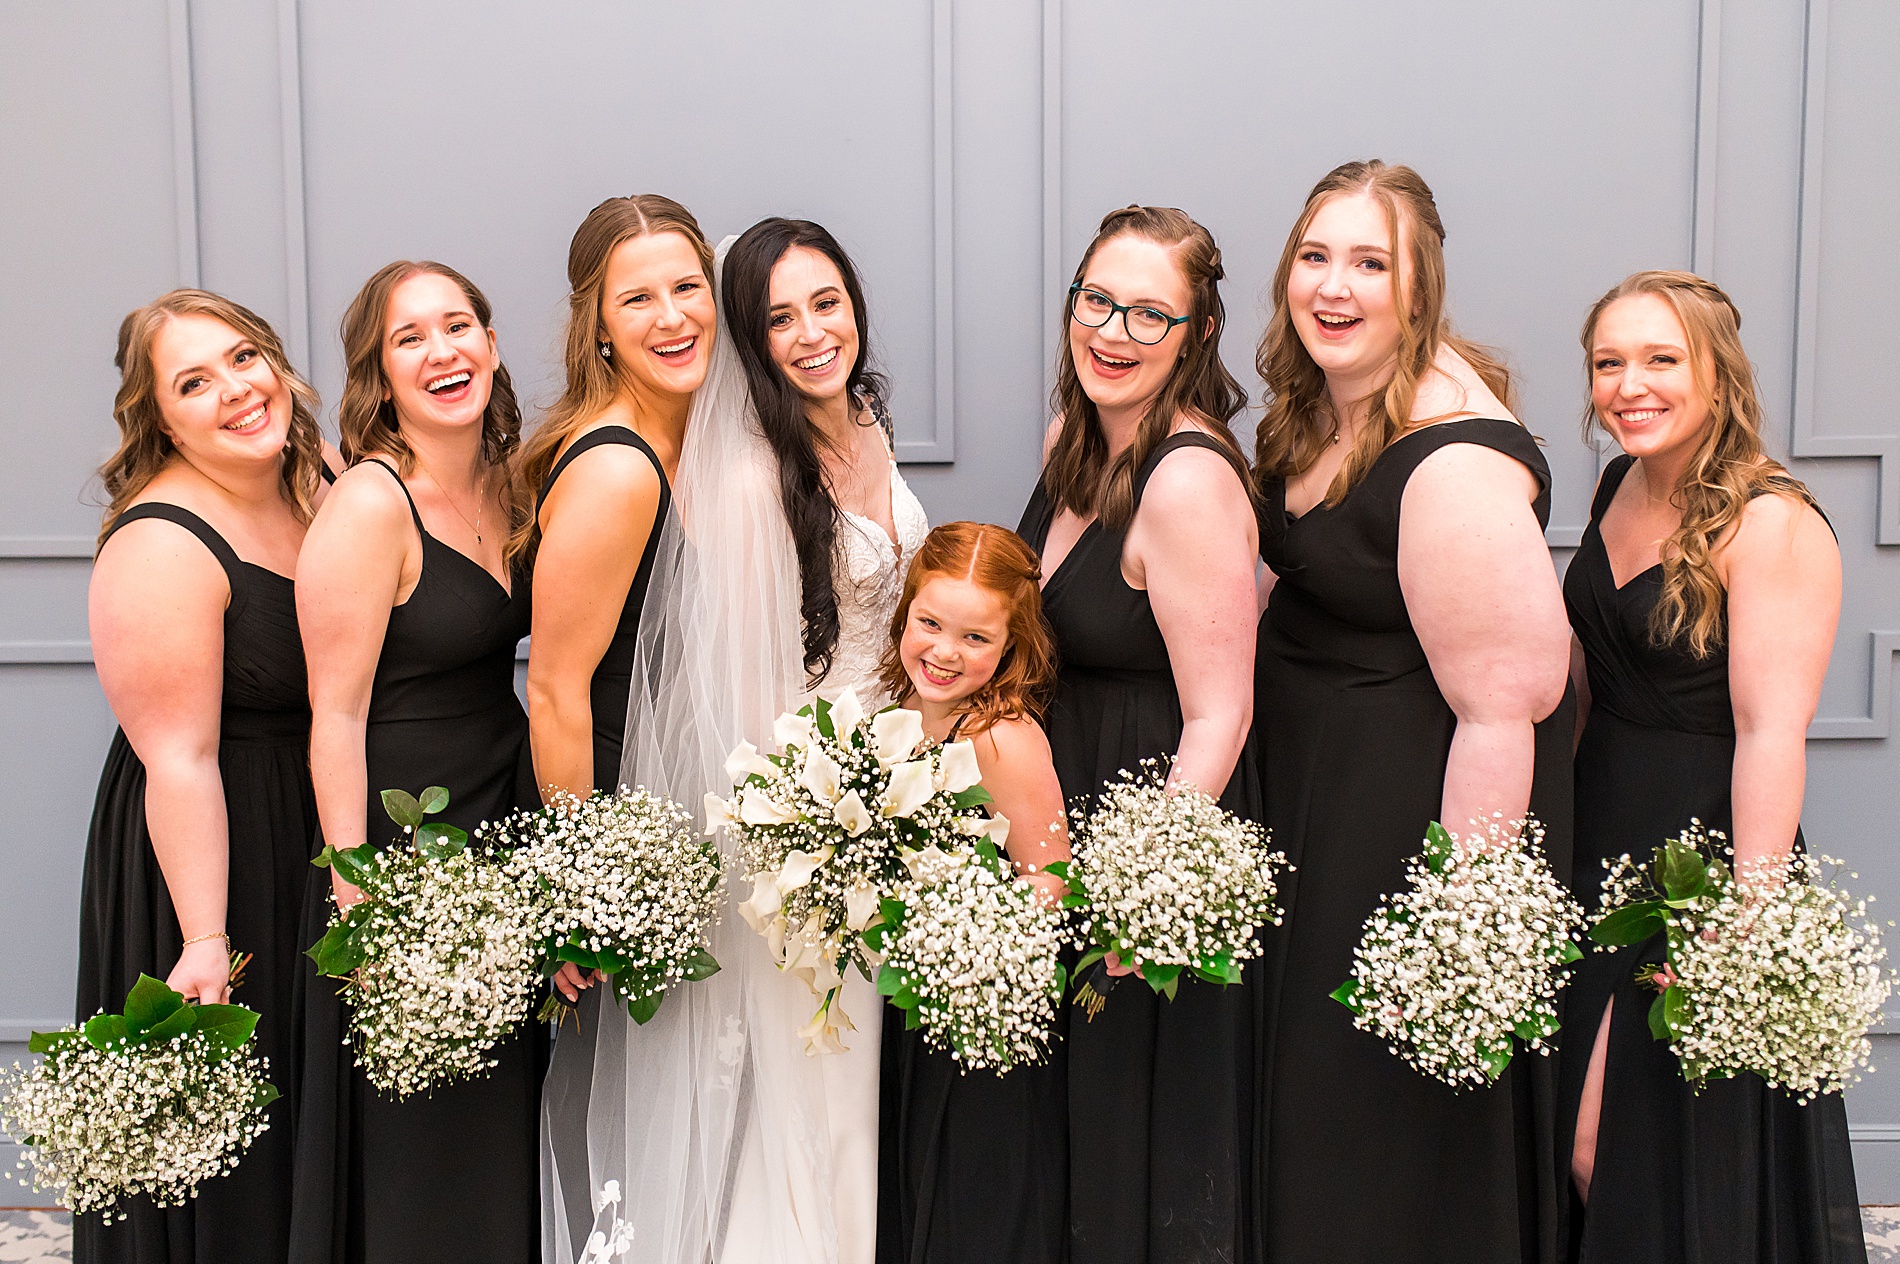 bride and bridesmaids in black dresses hold white wedding bouquets of babies breath